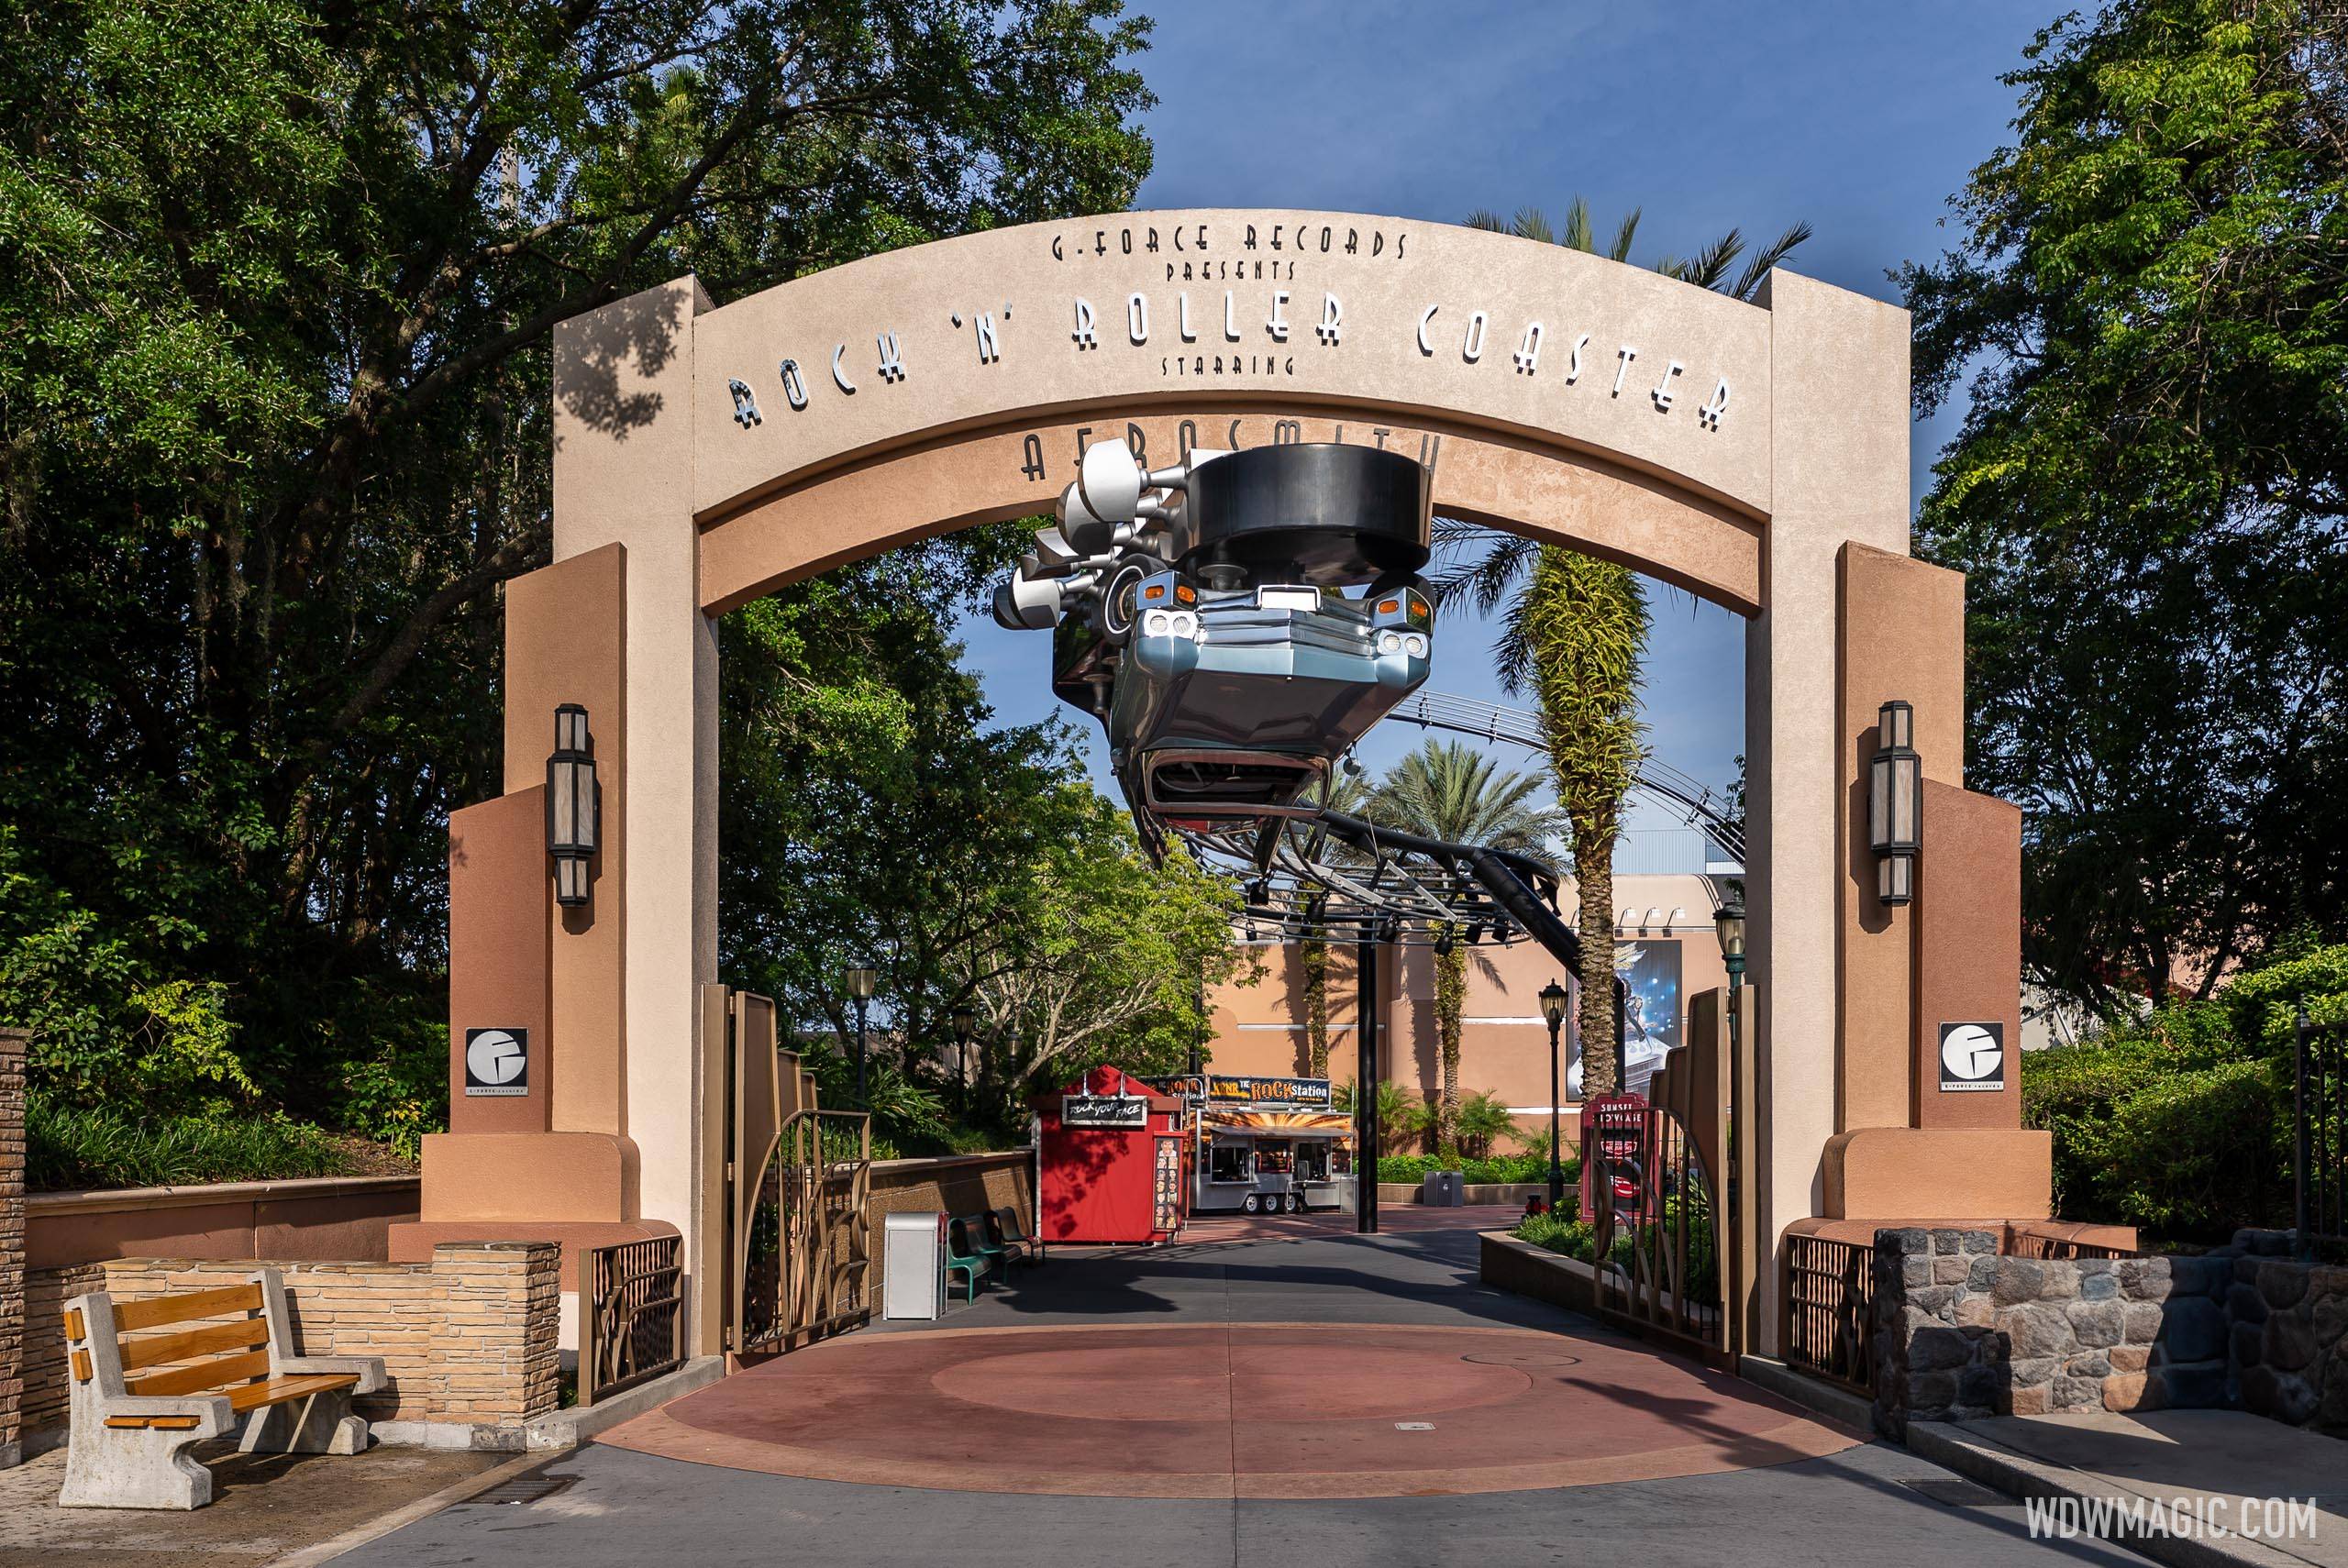 The Rock 'n' Roller Coaster Closure Has Been DELAYED at Disney World